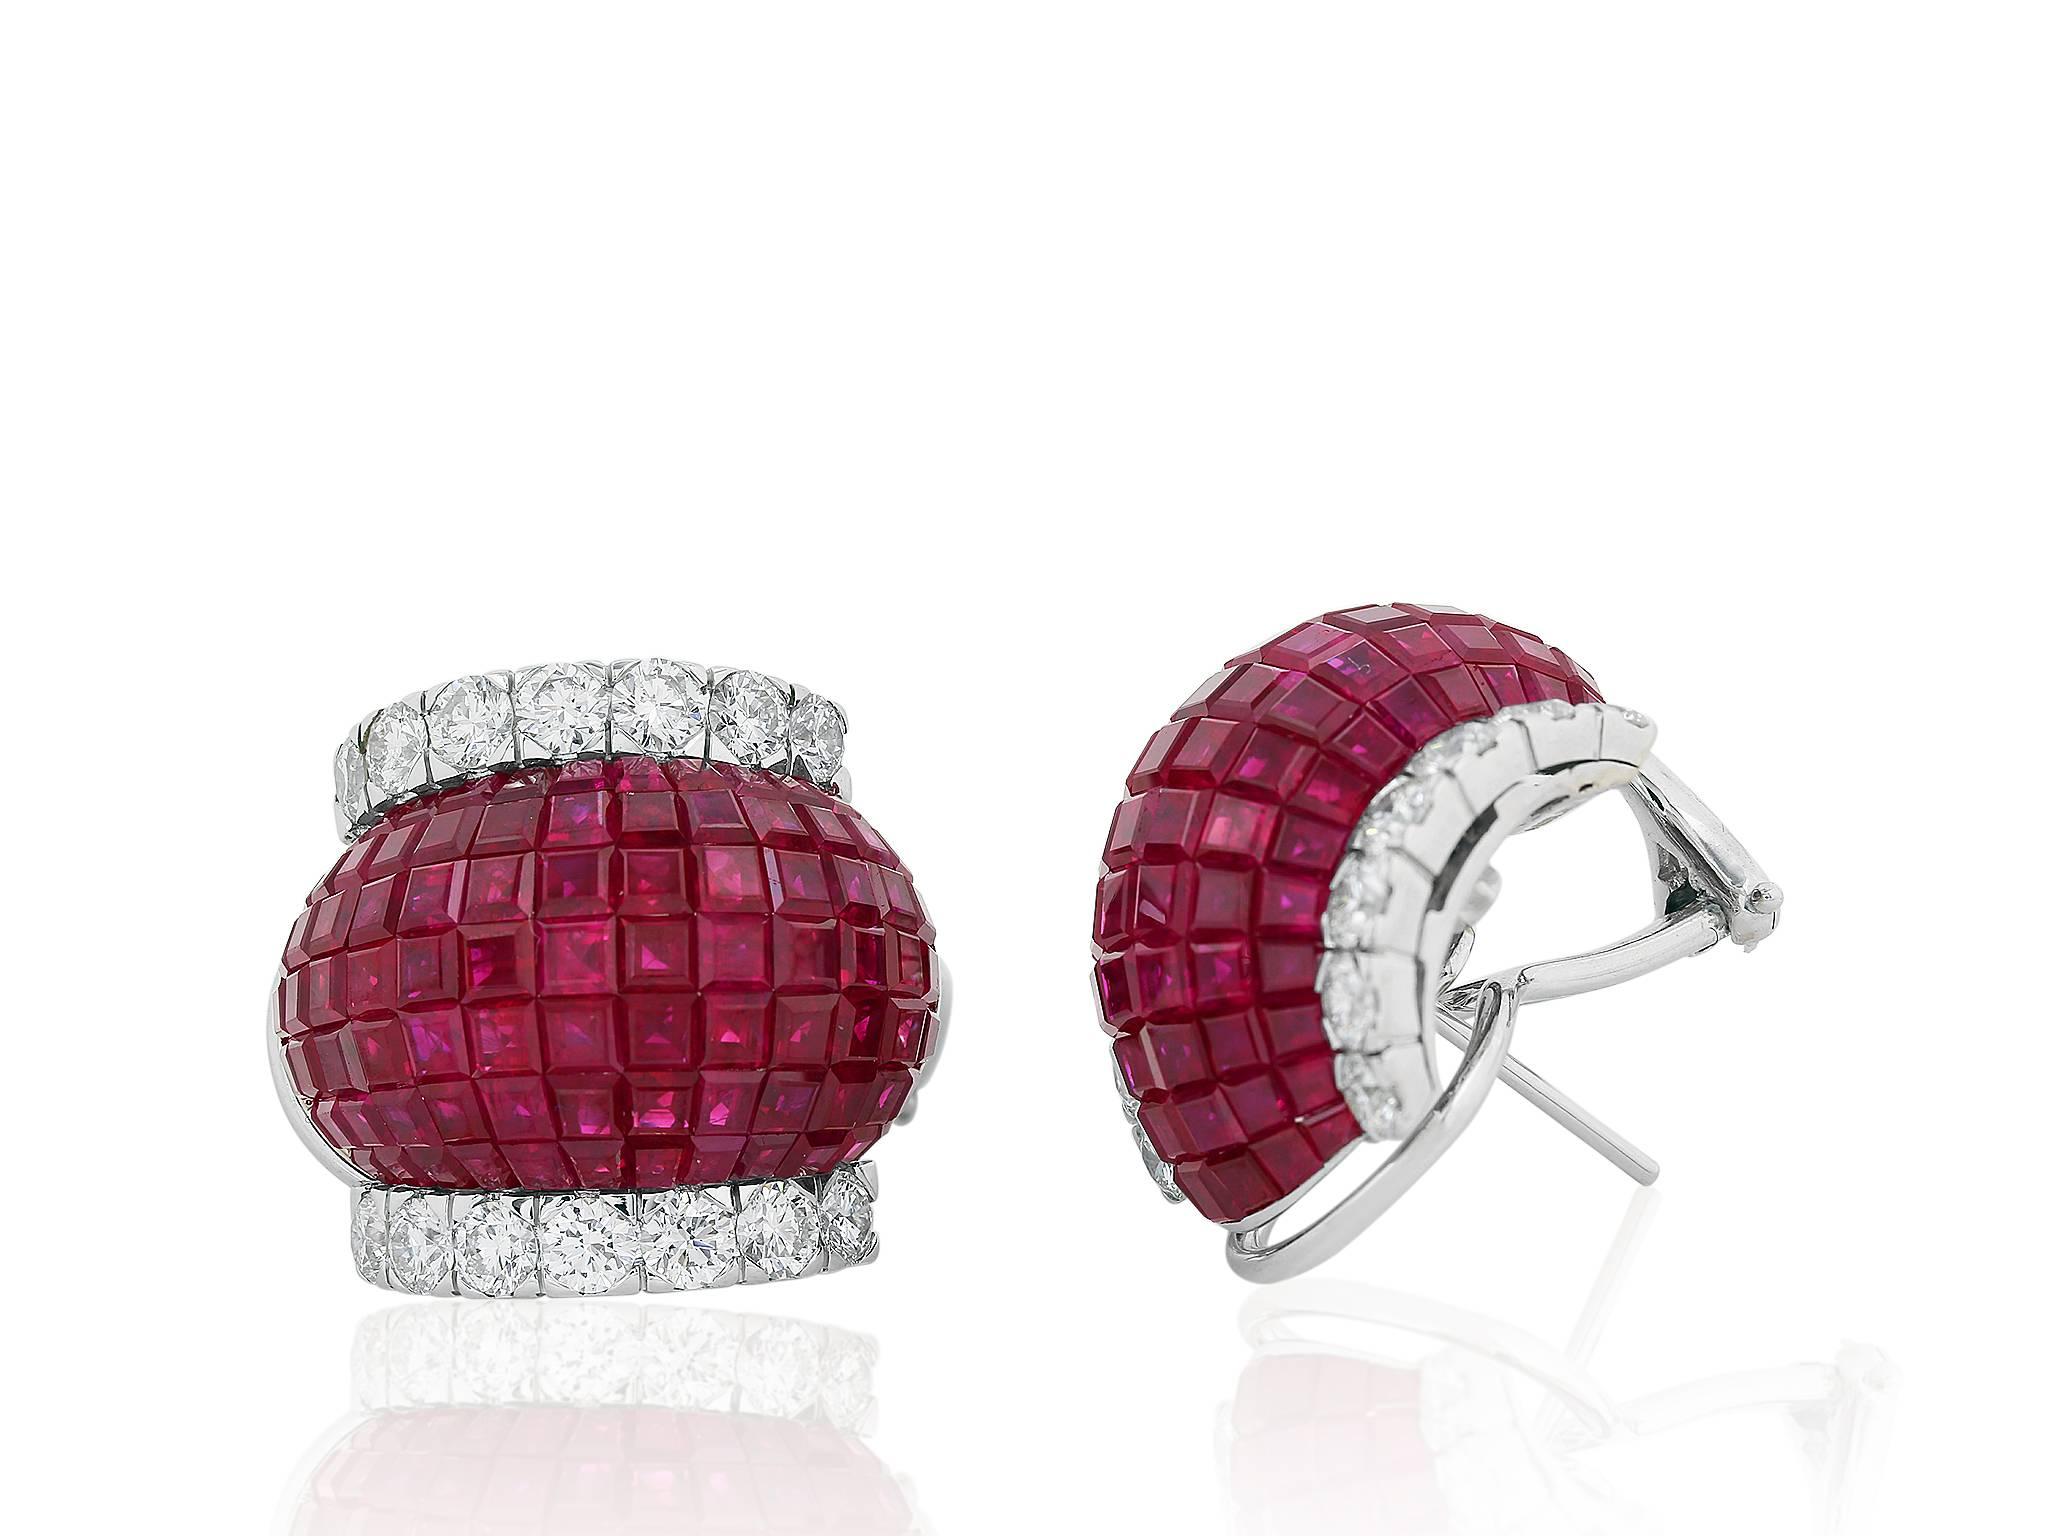 18 karat white gold clip earrings consisting of 182 invisible set princess cut rubies having a total weight 16.59 carats set with 36 round brilliant cut diamonds having a total weight of 1.58 carats.